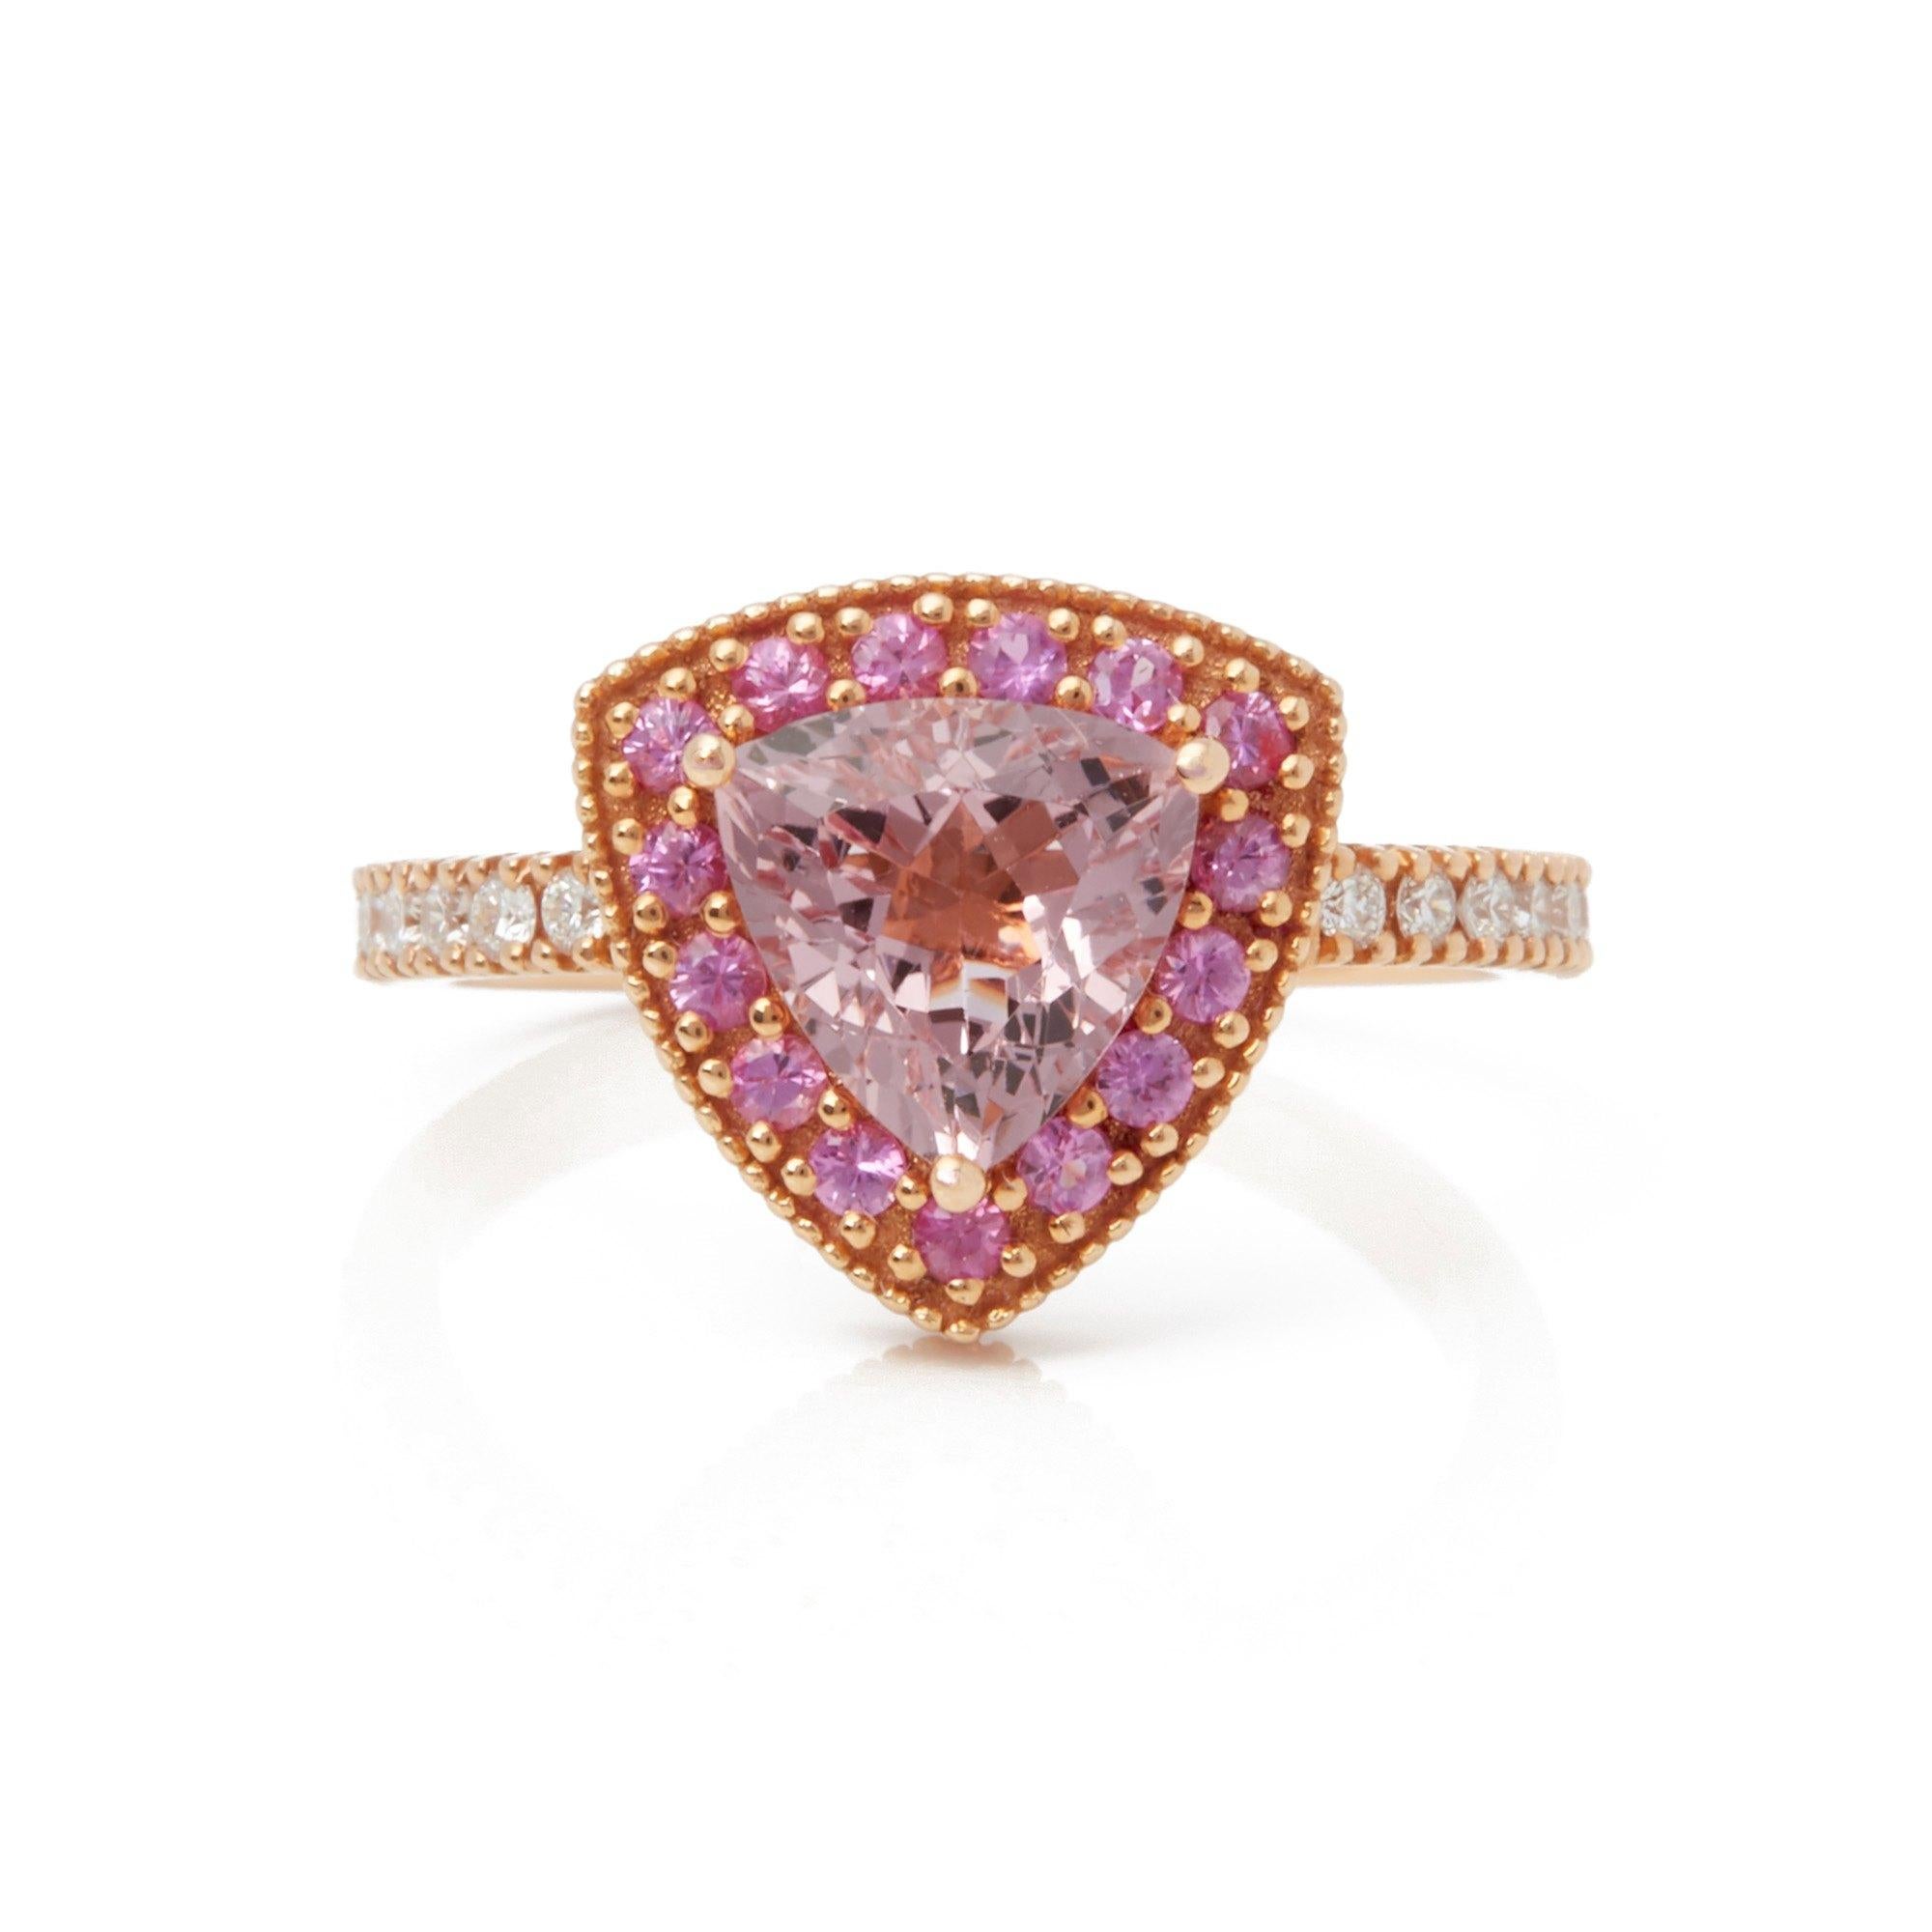 This ring designed by David Jerome is from his private collection and features one triliant cut pink Morganite sourced in Brazil. Totalling 1.49cts set with round brilliant cut Diamonds and pink Sapphires totalling 0.49cts. Mounted in an 18k rose